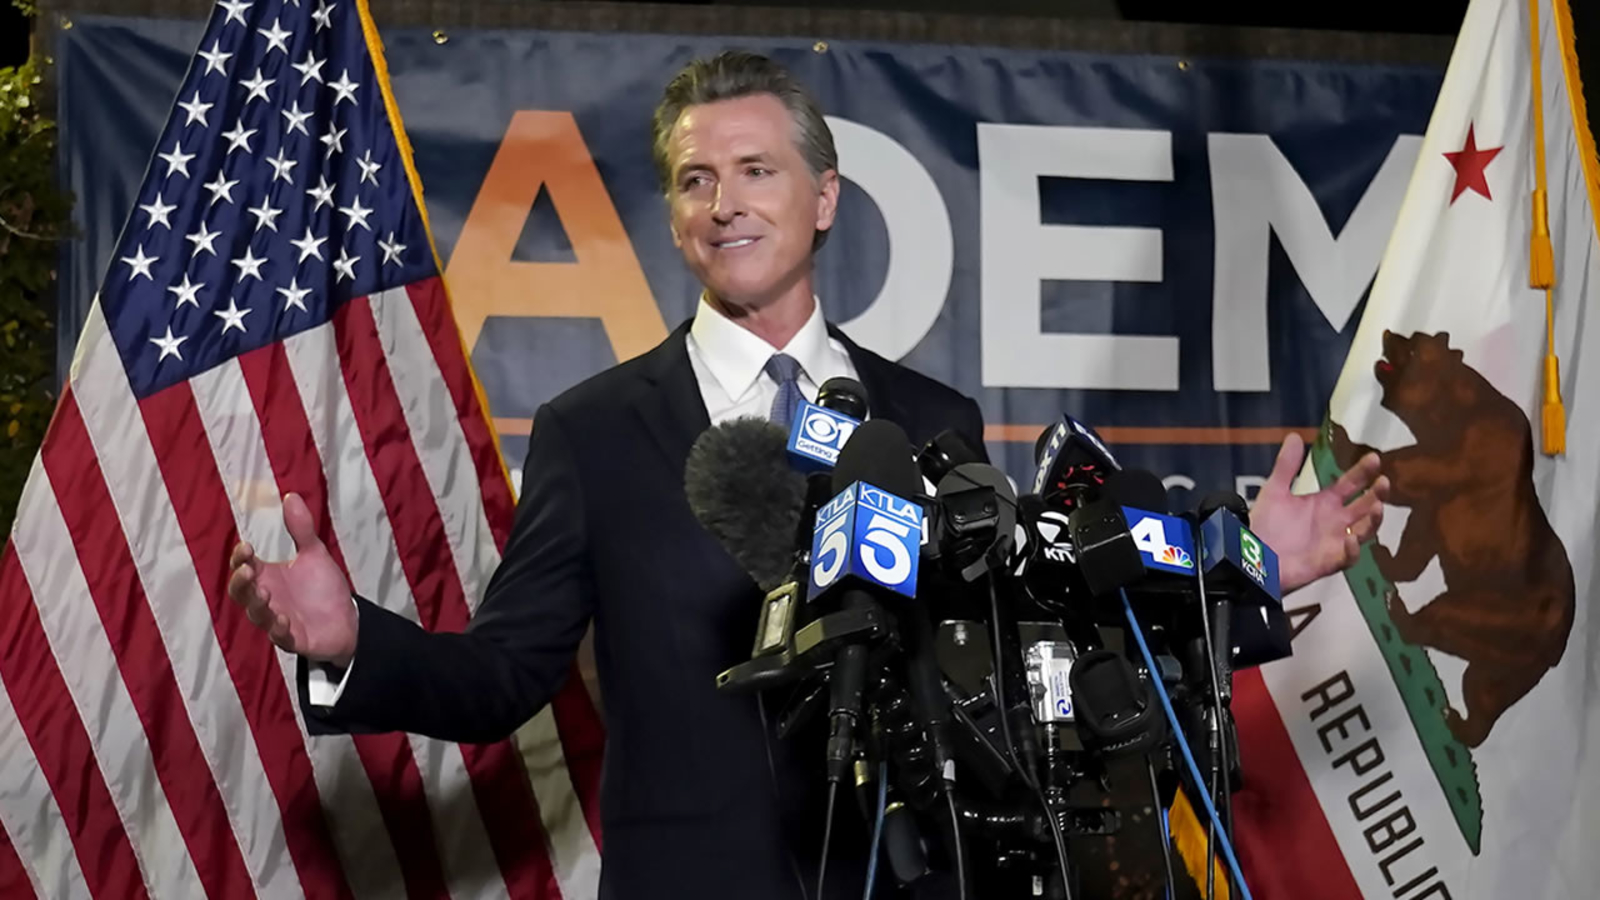 Newsom addresses reporters in Sacramento after beating back the recall attempt. Photo credit: ABC 7 News